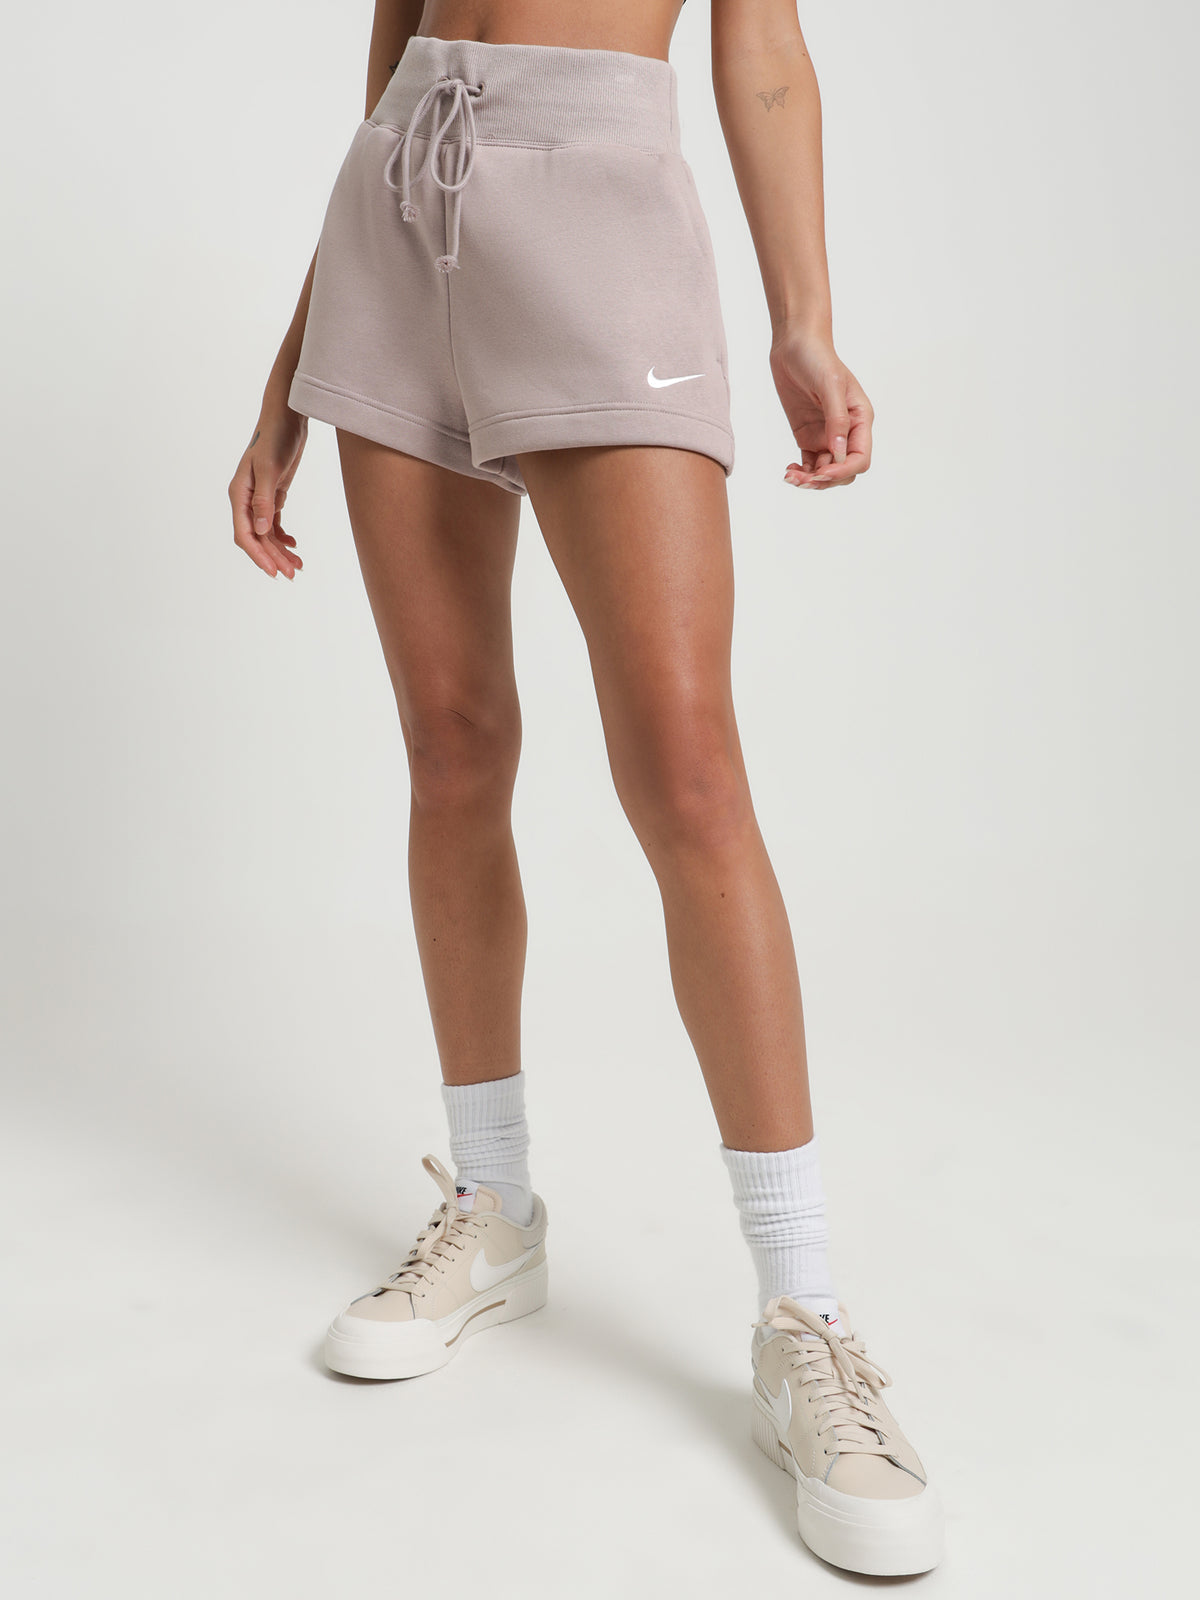 Sportswear Phoenix Fleece Highrise Shorts in Diffused Taupe - Glue Store